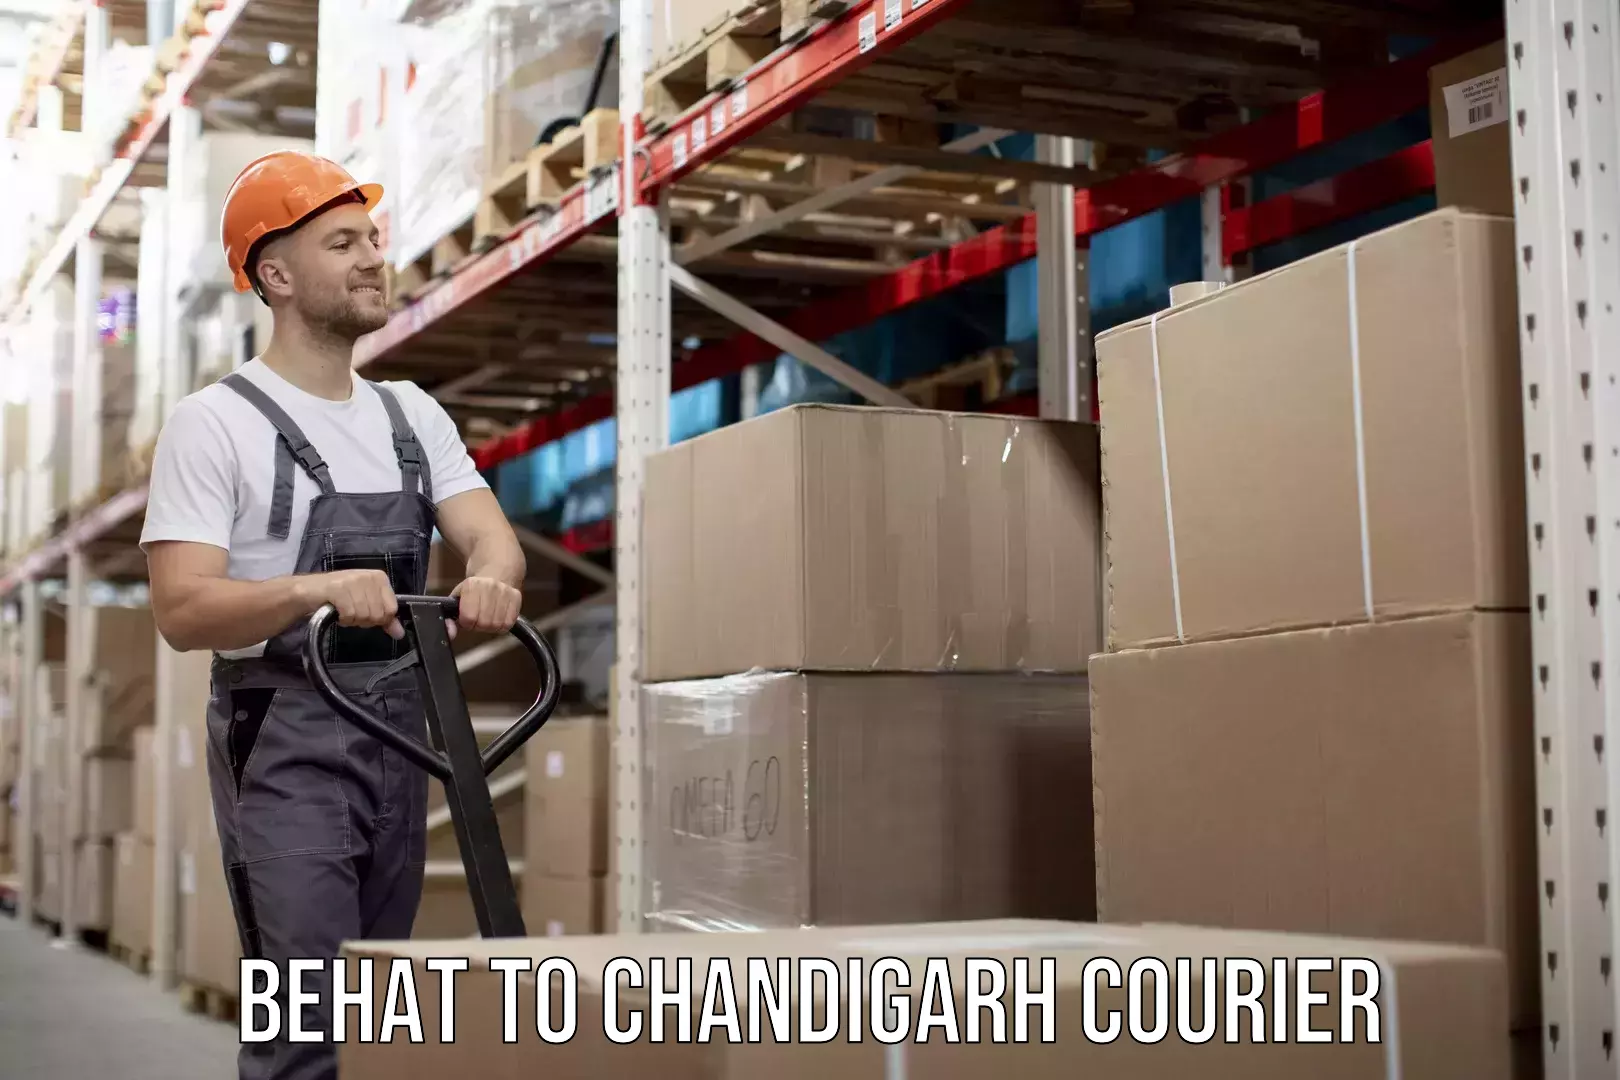 Overnight delivery services Behat to Chandigarh